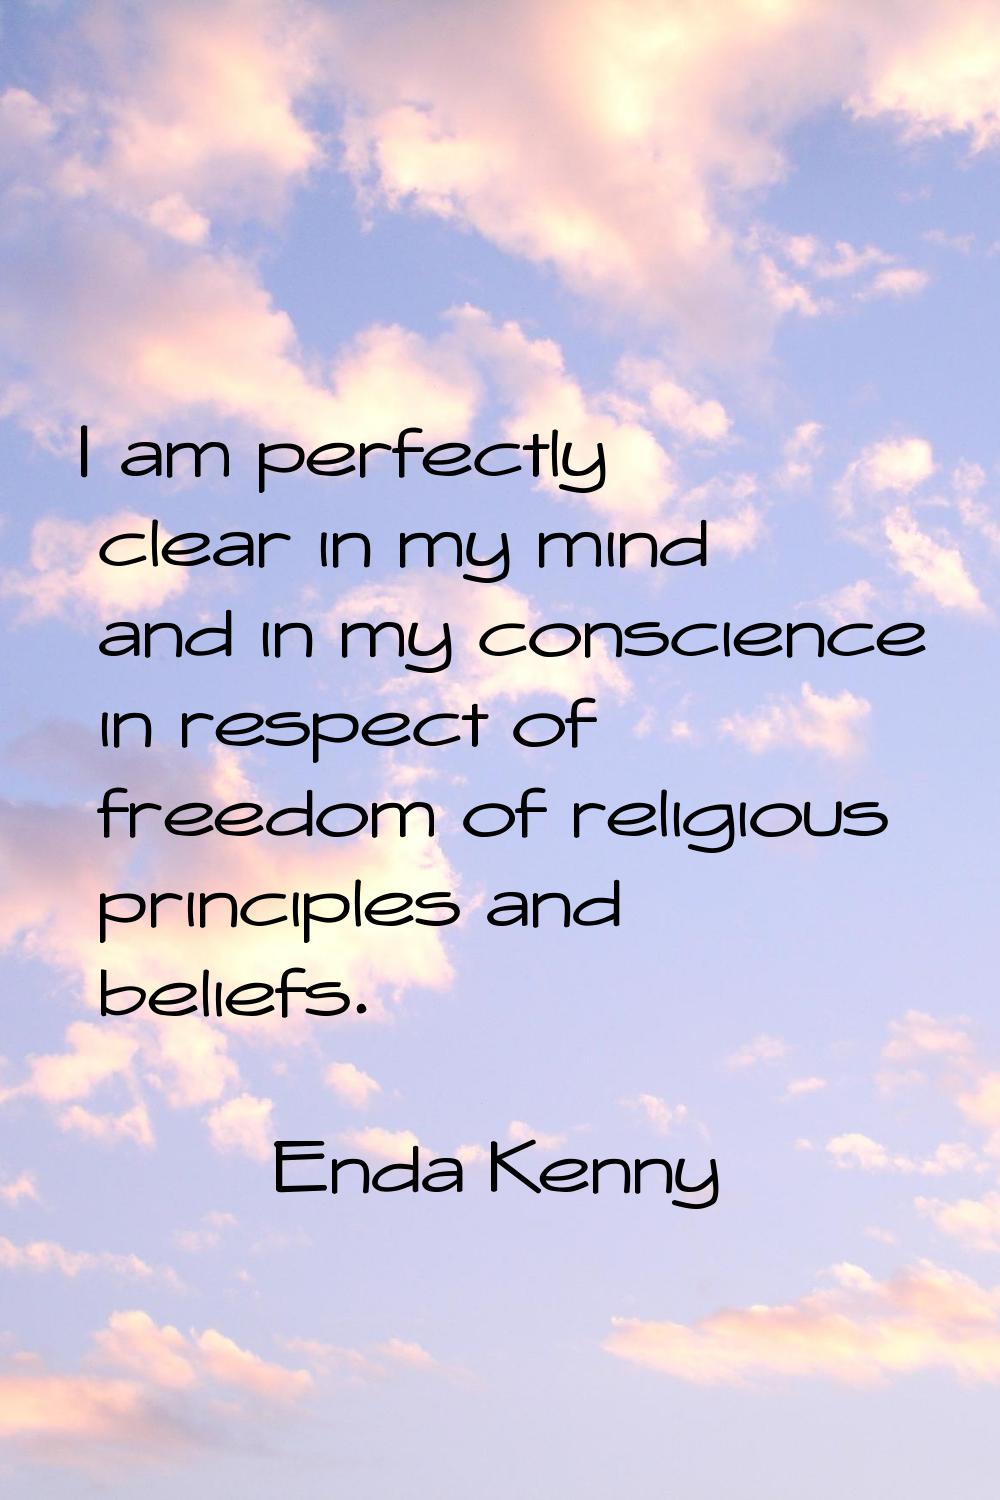 I am perfectly clear in my mind and in my conscience in respect of freedom of religious principles 